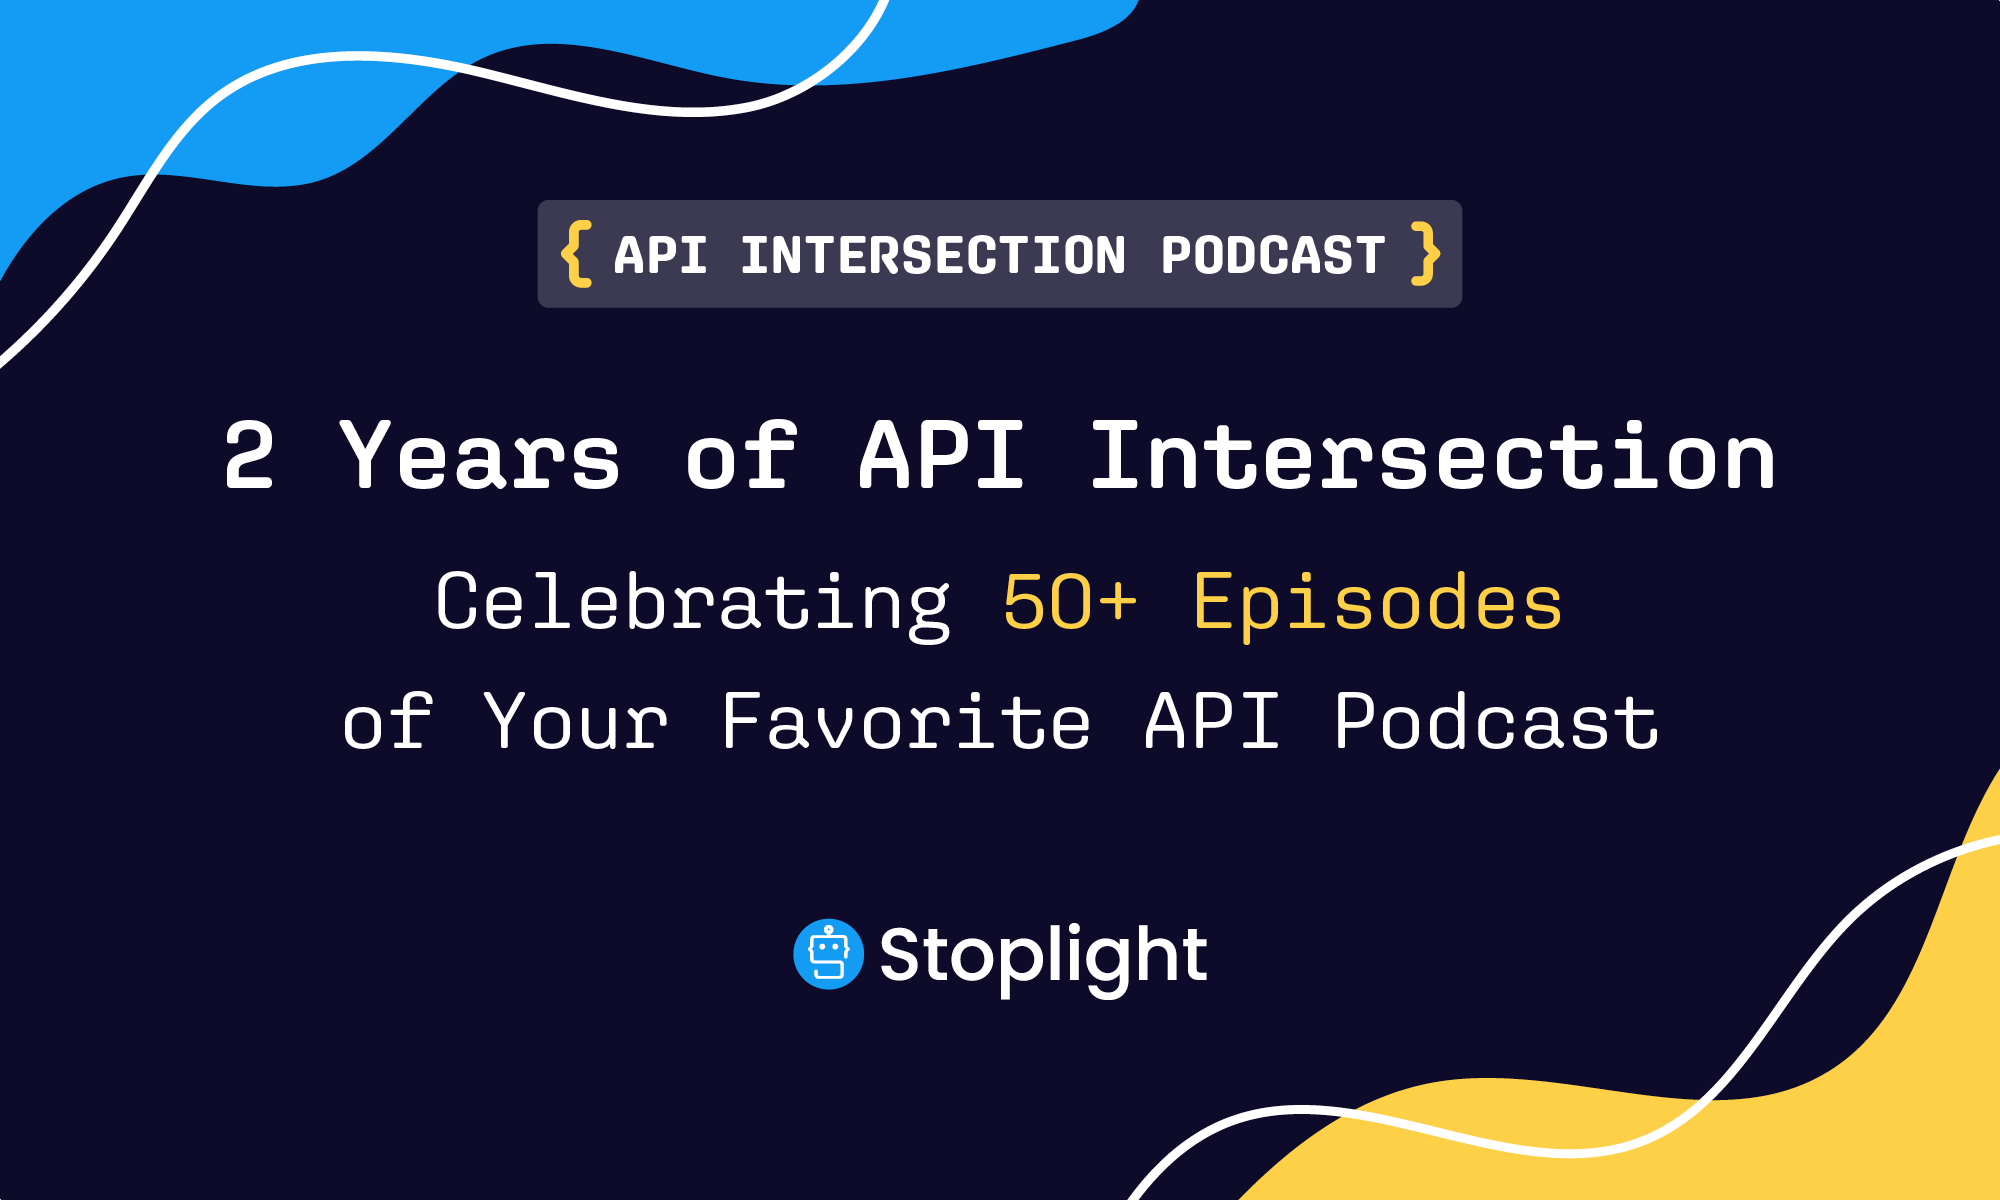 2 Years of API Intersection: Celebrating 50+ Episodes of the Podcast